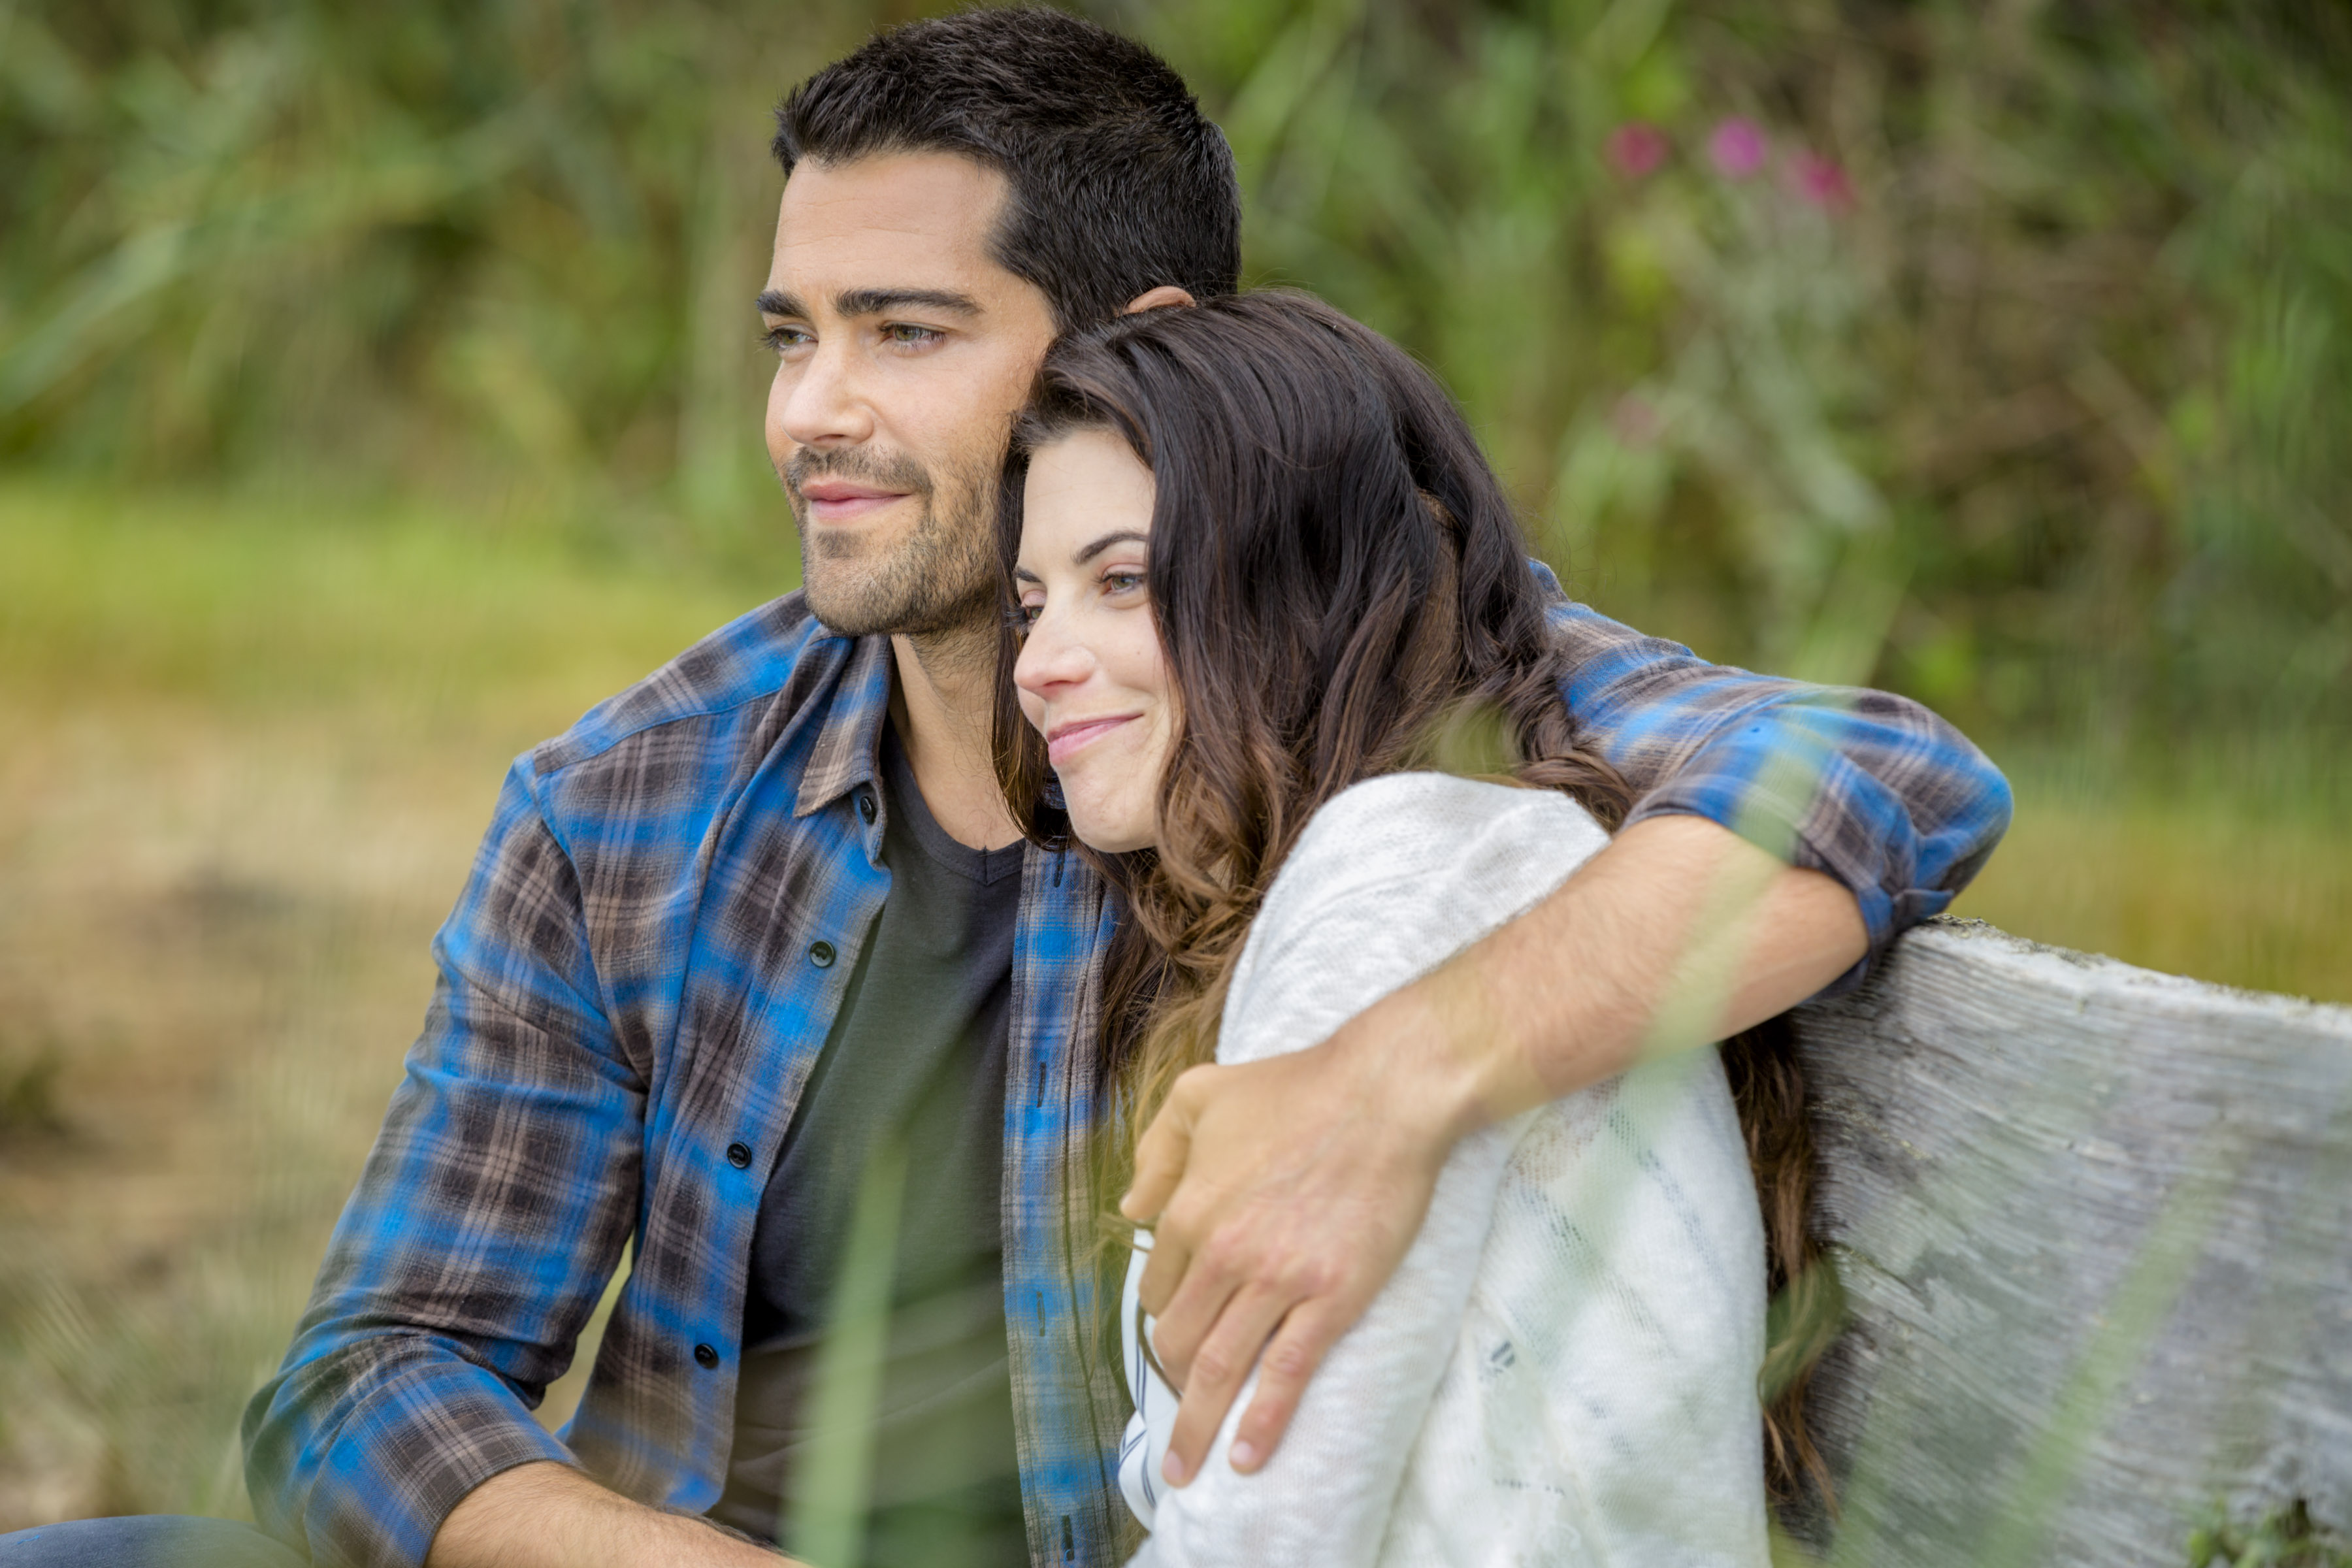 Jesse Metcalfe with his arm around Meghan Ory in Chesapeake Shores